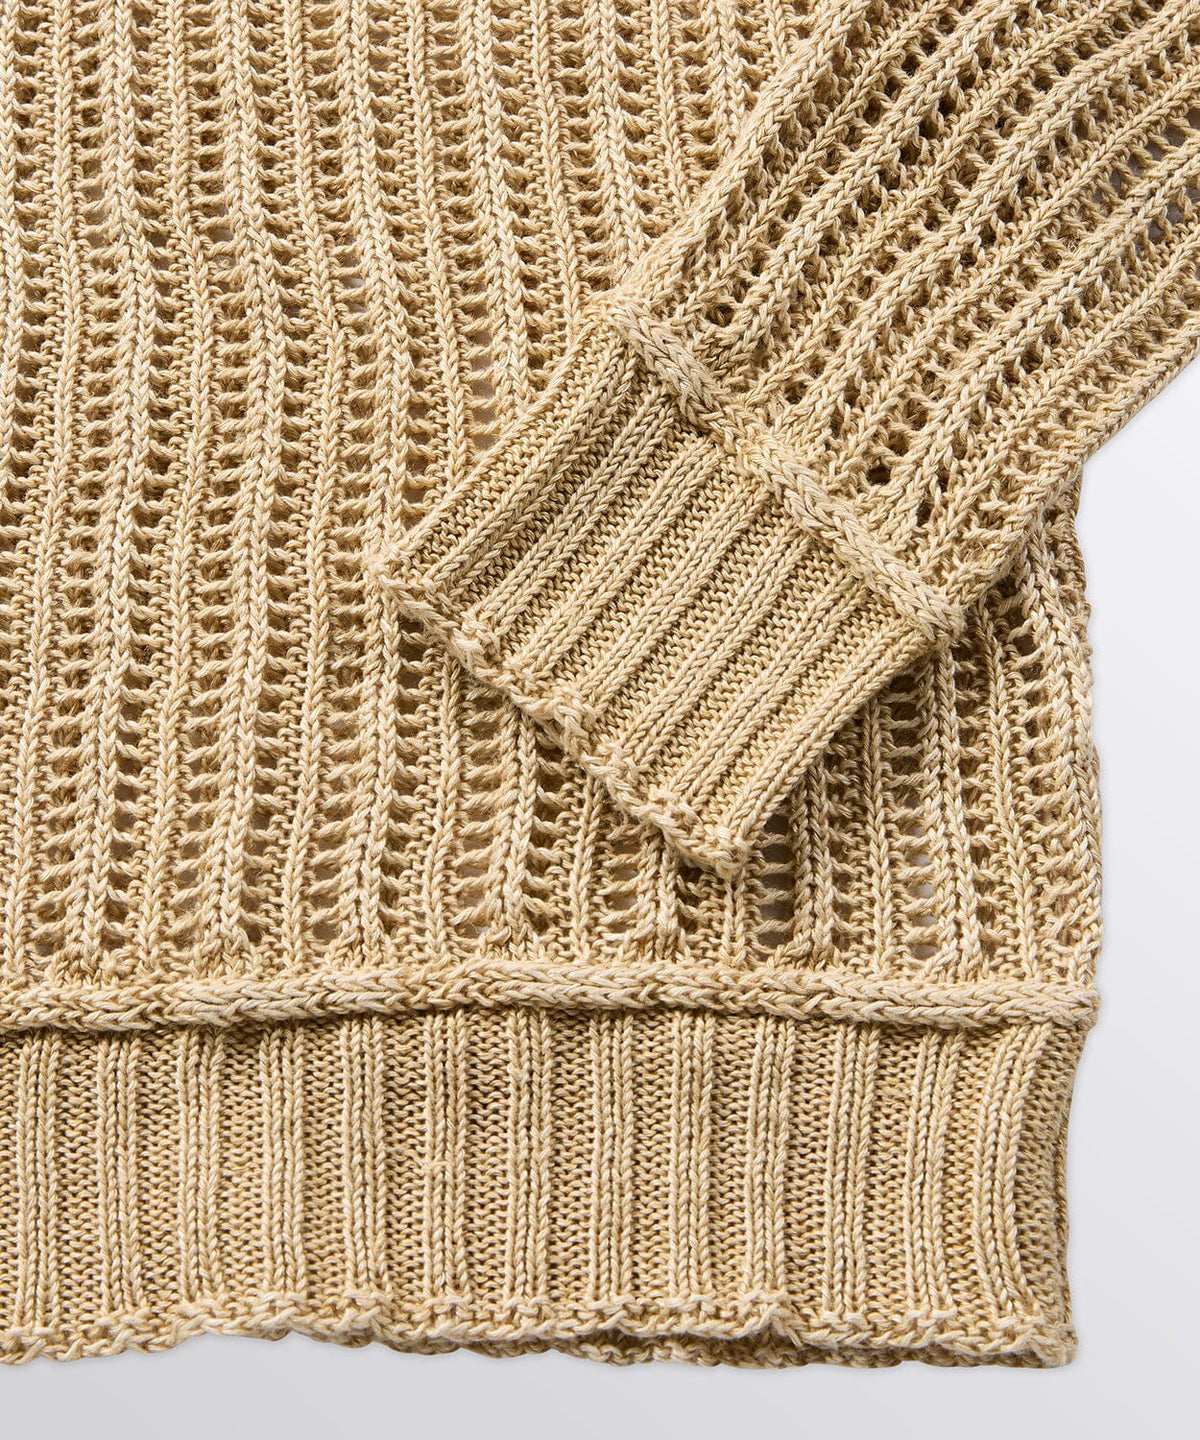 details of a sweater